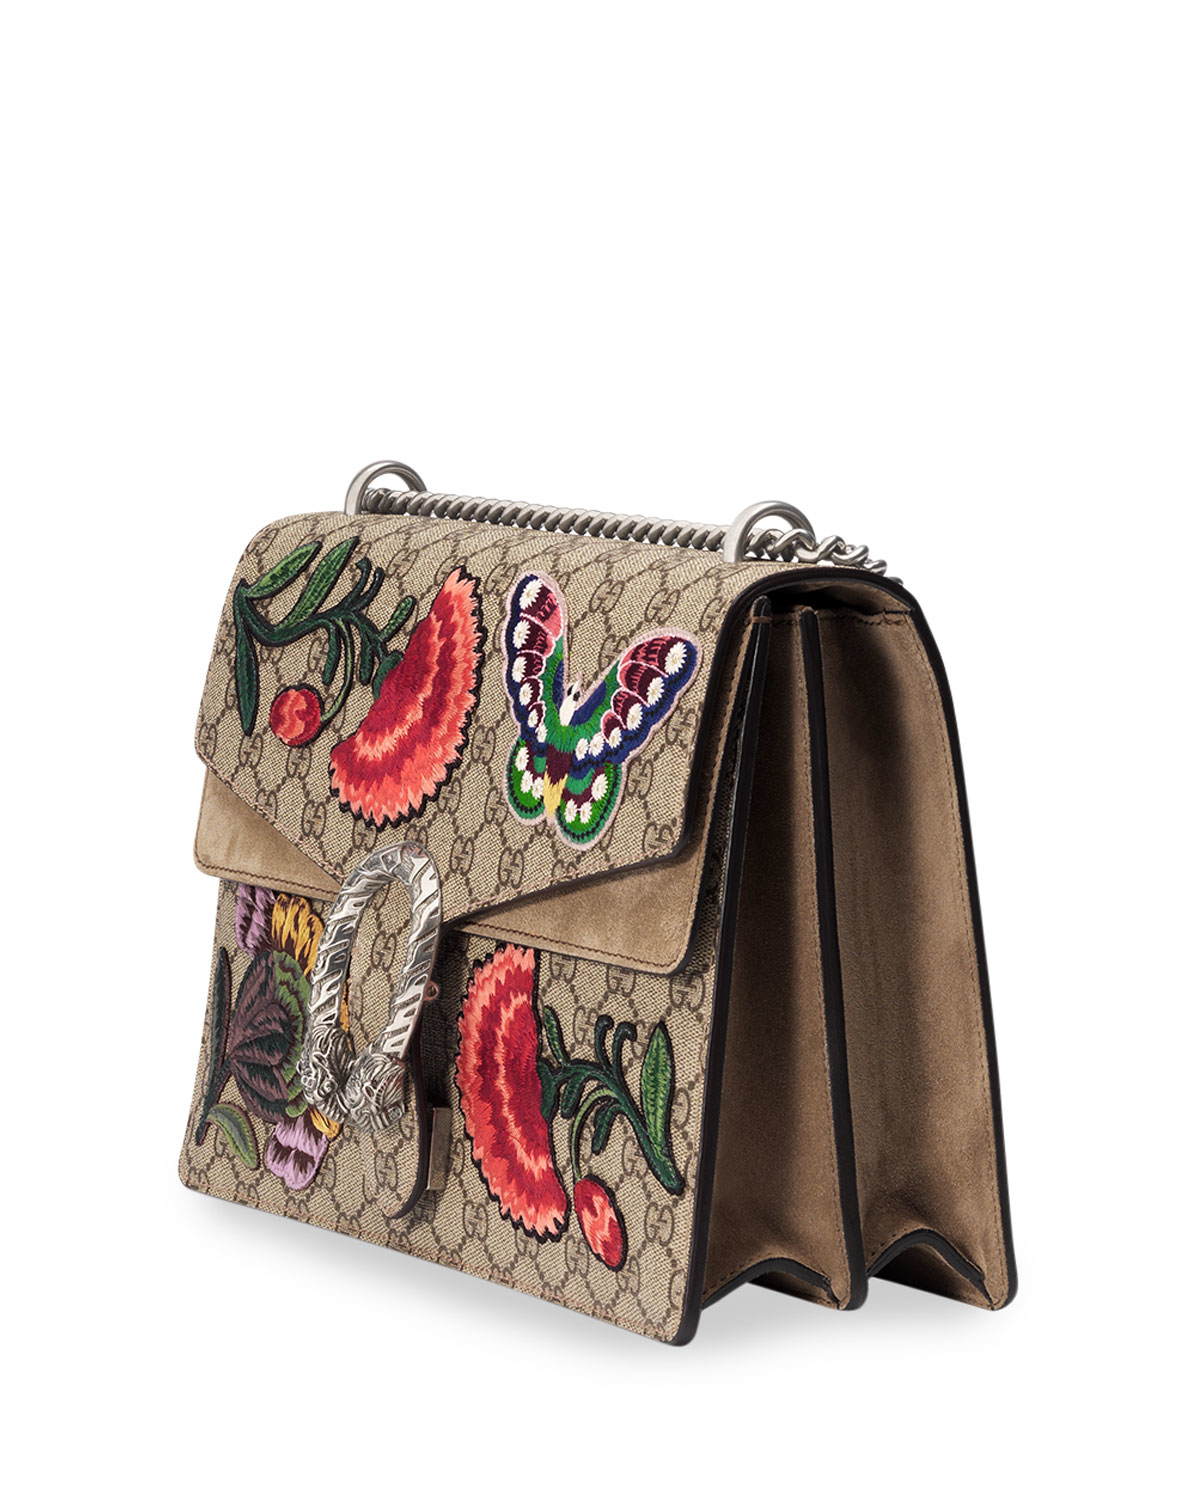 Gucci Dionysus Butterfly Gg Supreme Canvas Shoulder Bag - Lyst